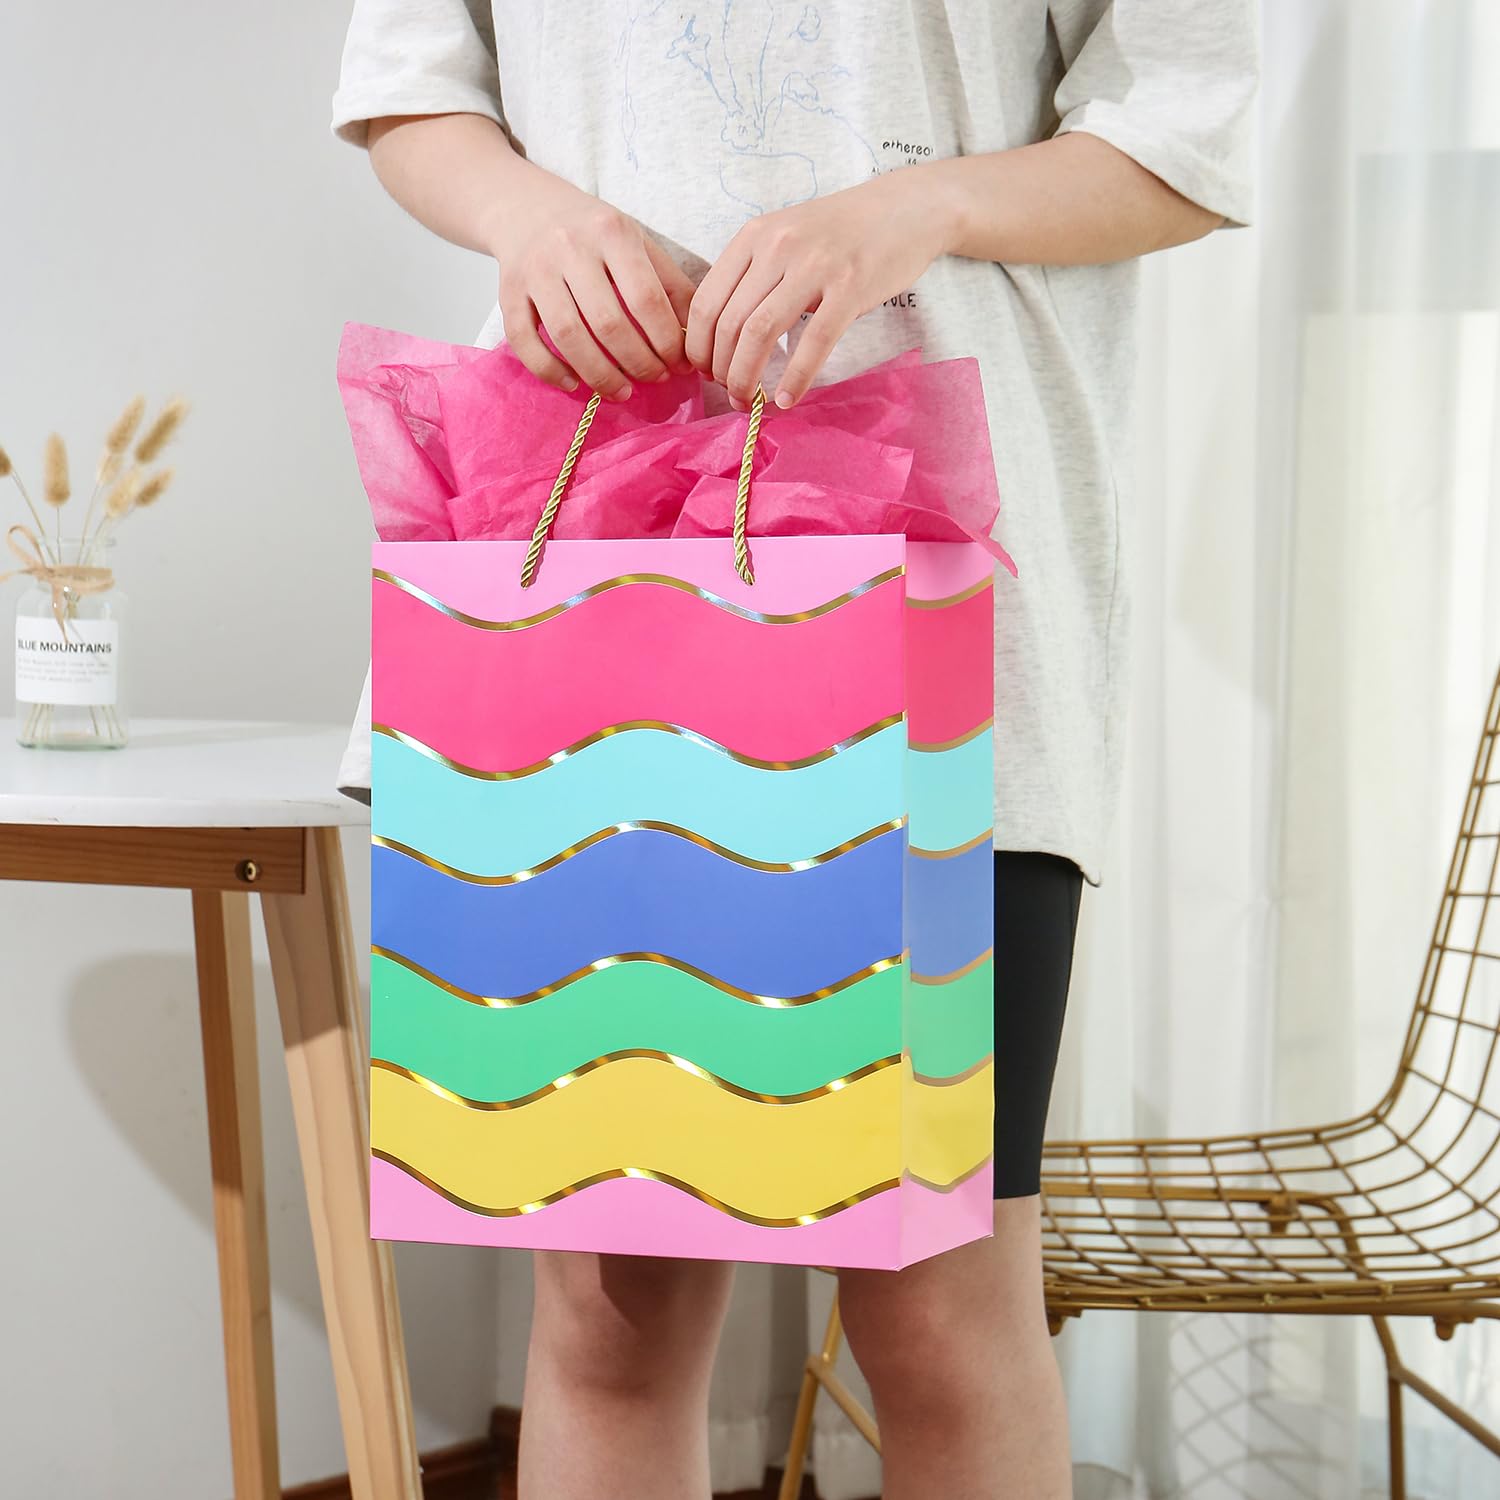 12.6" Paper Gift Bags with Tissue Paper, Extra Large Gift Bags with Handles, Birthday Gift Bags Medium Size, Rainbow Gift Bags Large Size, Medium Gift Bags for Kids, Birthday Bags Gift Wrap Bags Set